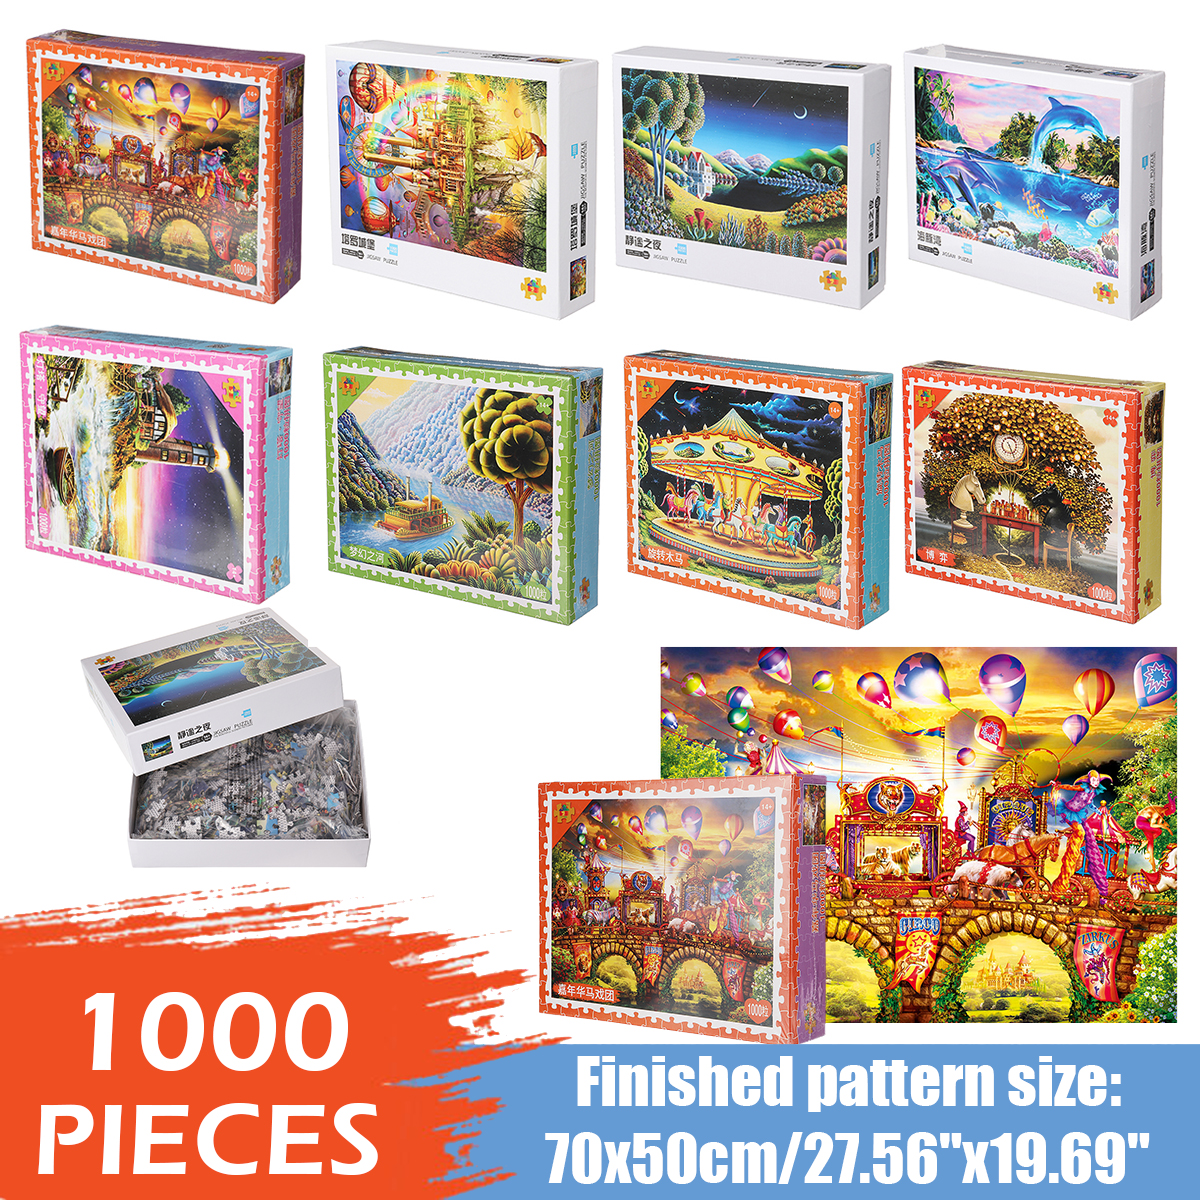 1000-Pieces-Jigsaw-Puzzle-Toy-For-Adults-Children-Kids-Games-Educational-Toys-1651996-1